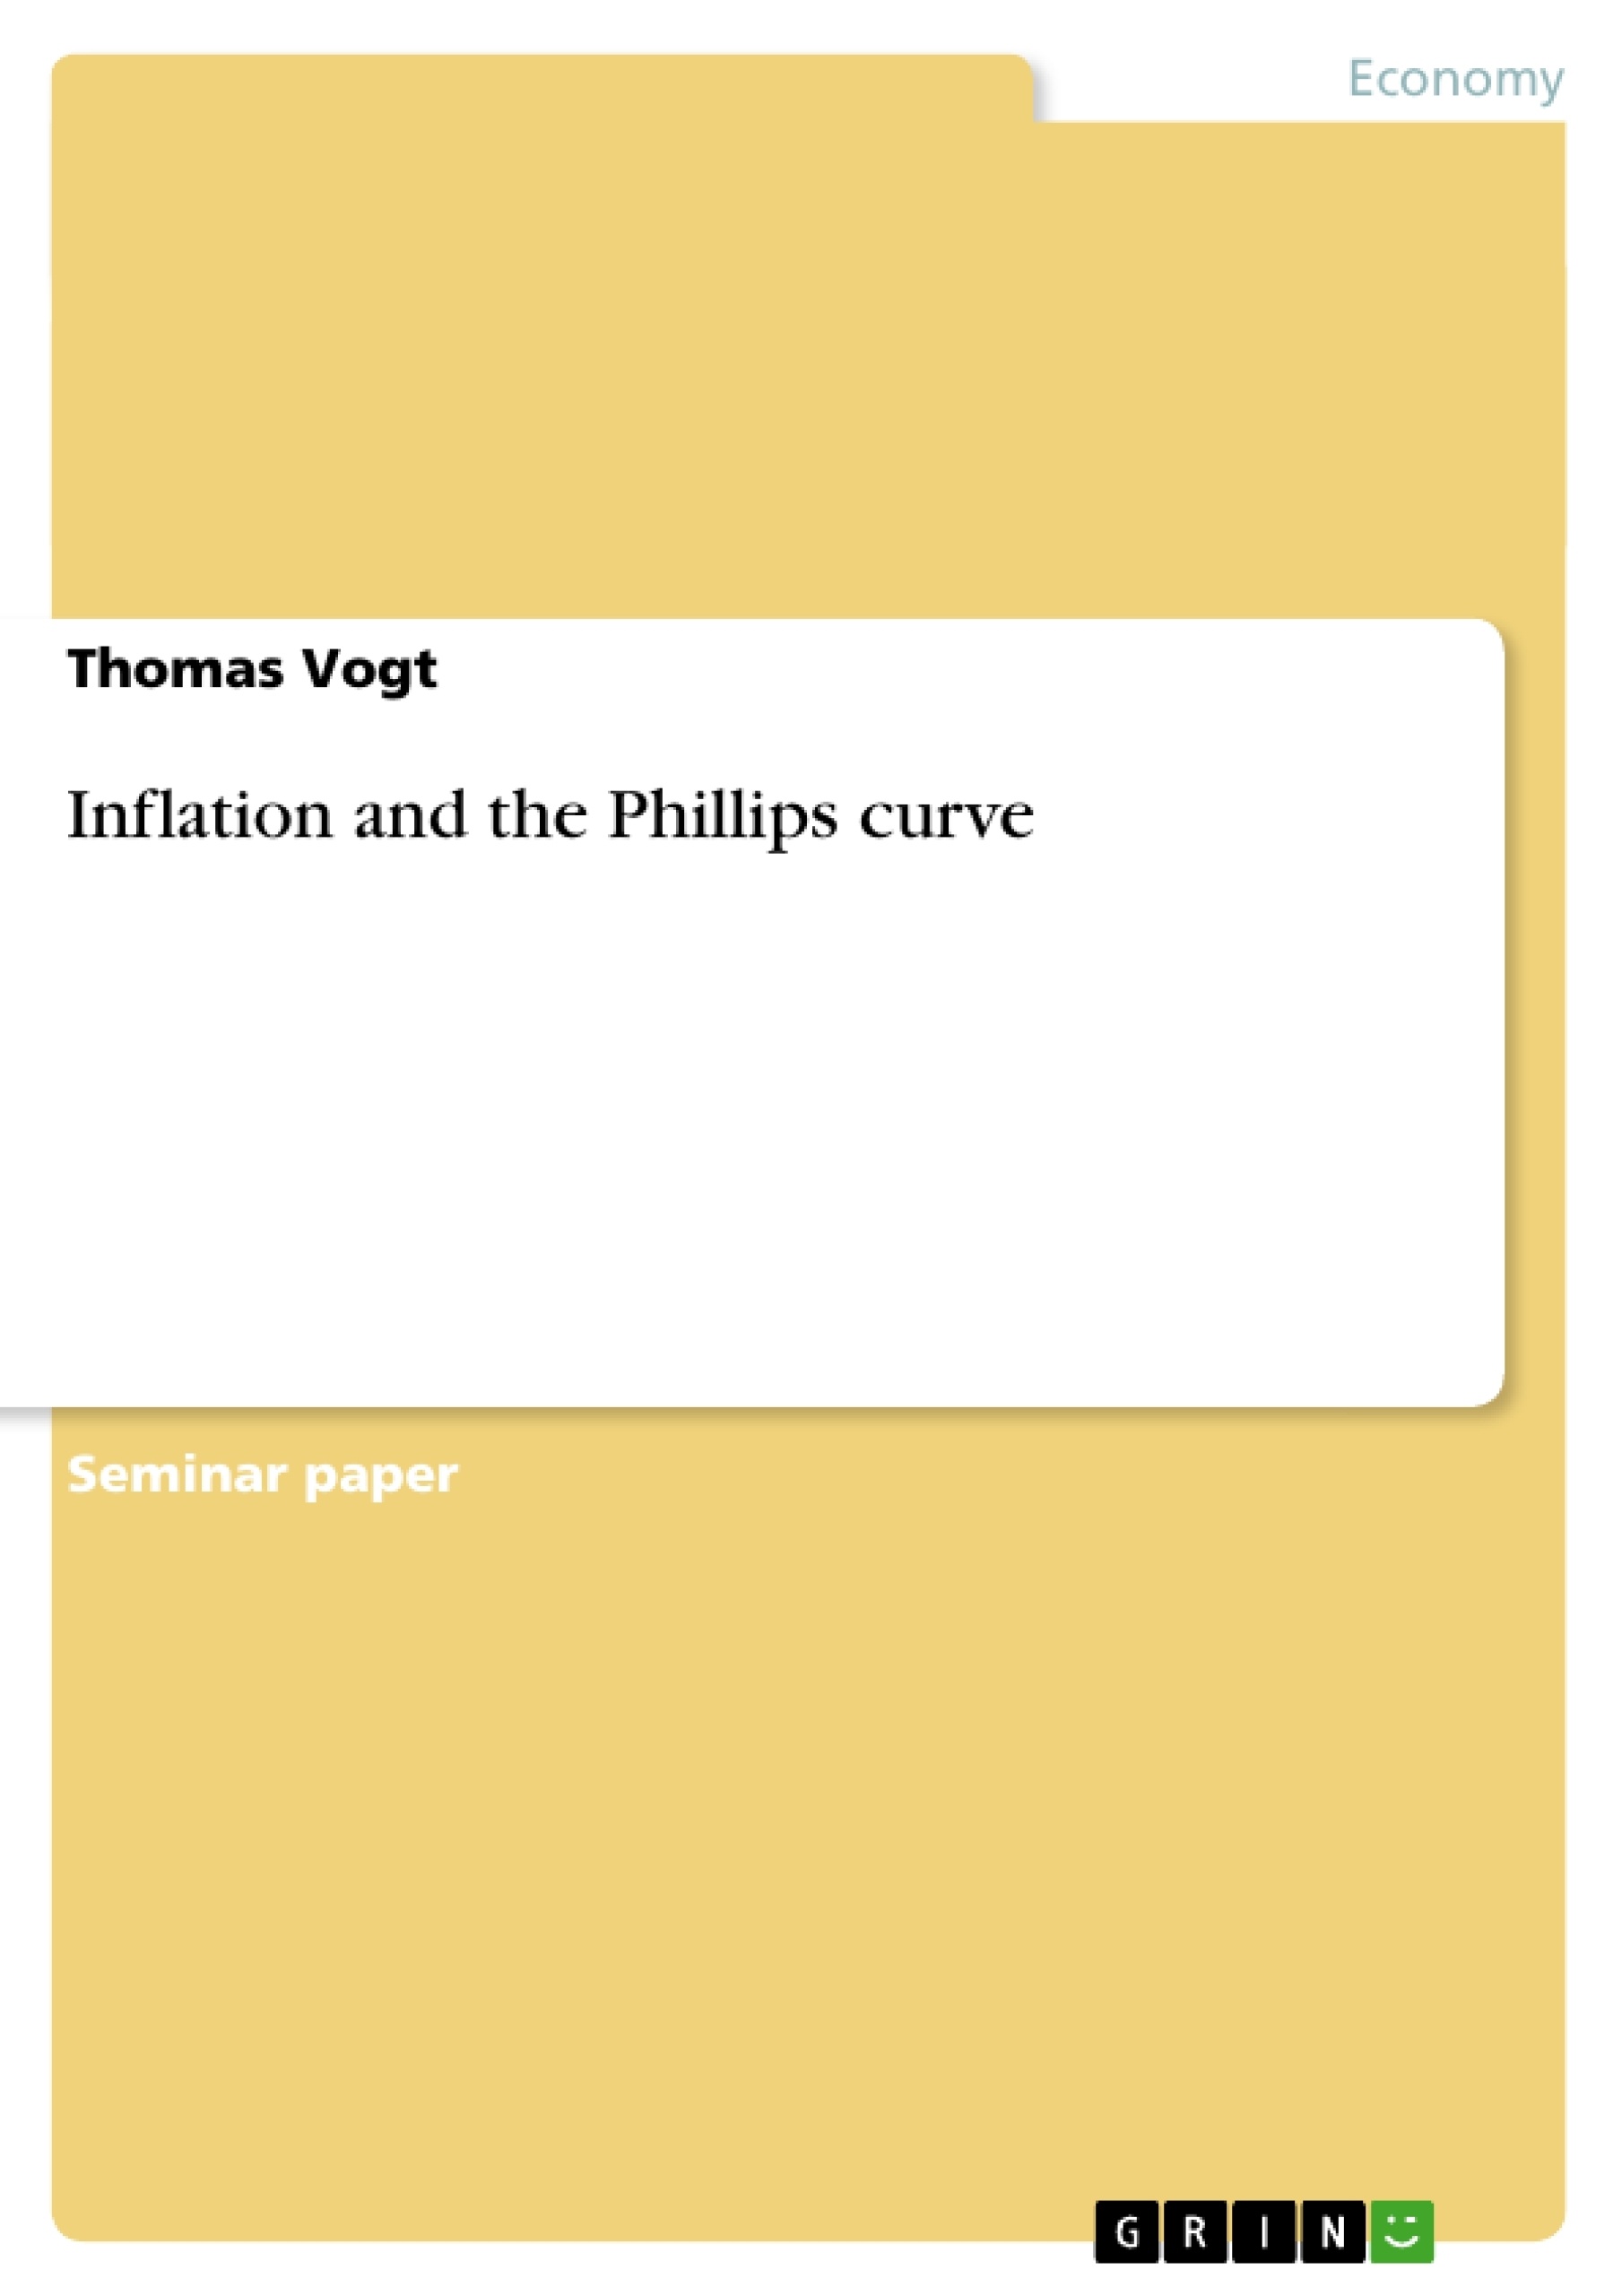 Titel: Inflation and the Phillips curve